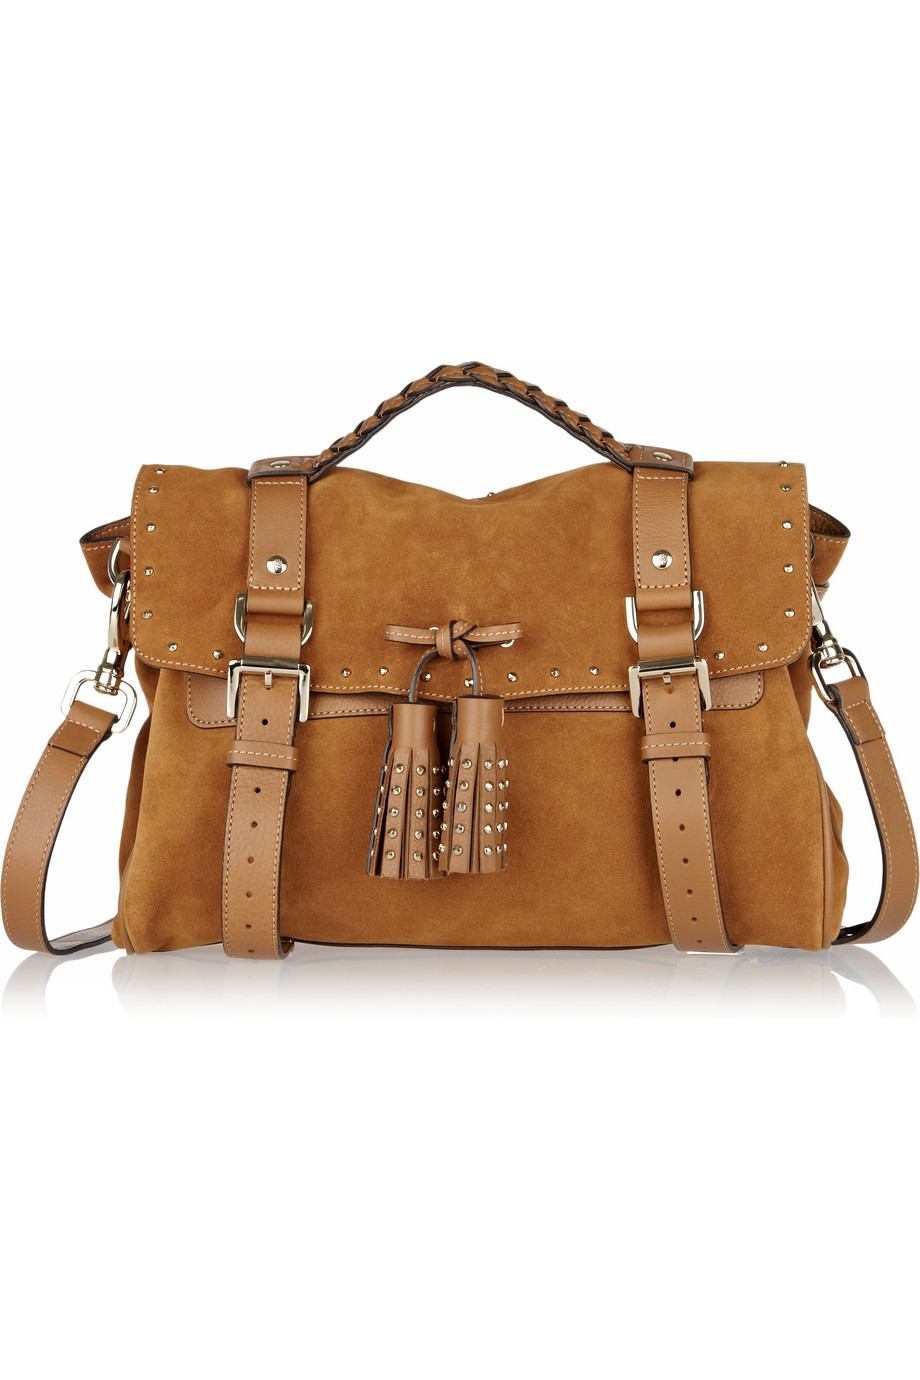 Lyst - Mulberry Tassel Studded Suede Bag in Brown